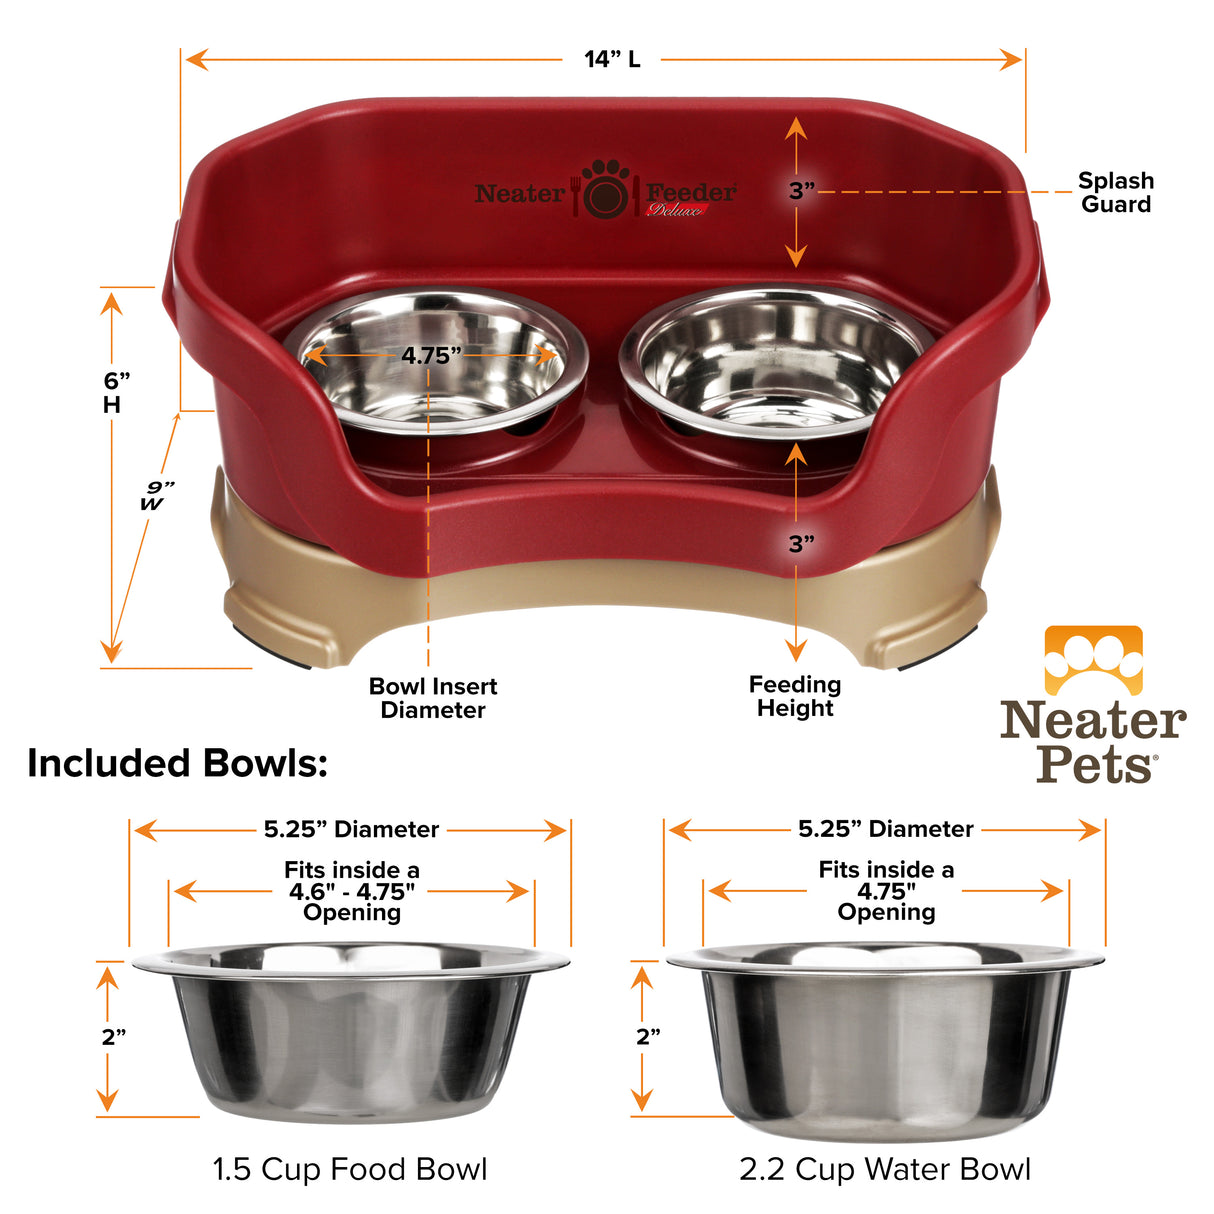 Deluxe Cranberry Small Dog Neater Feeder and Bowl dimensions